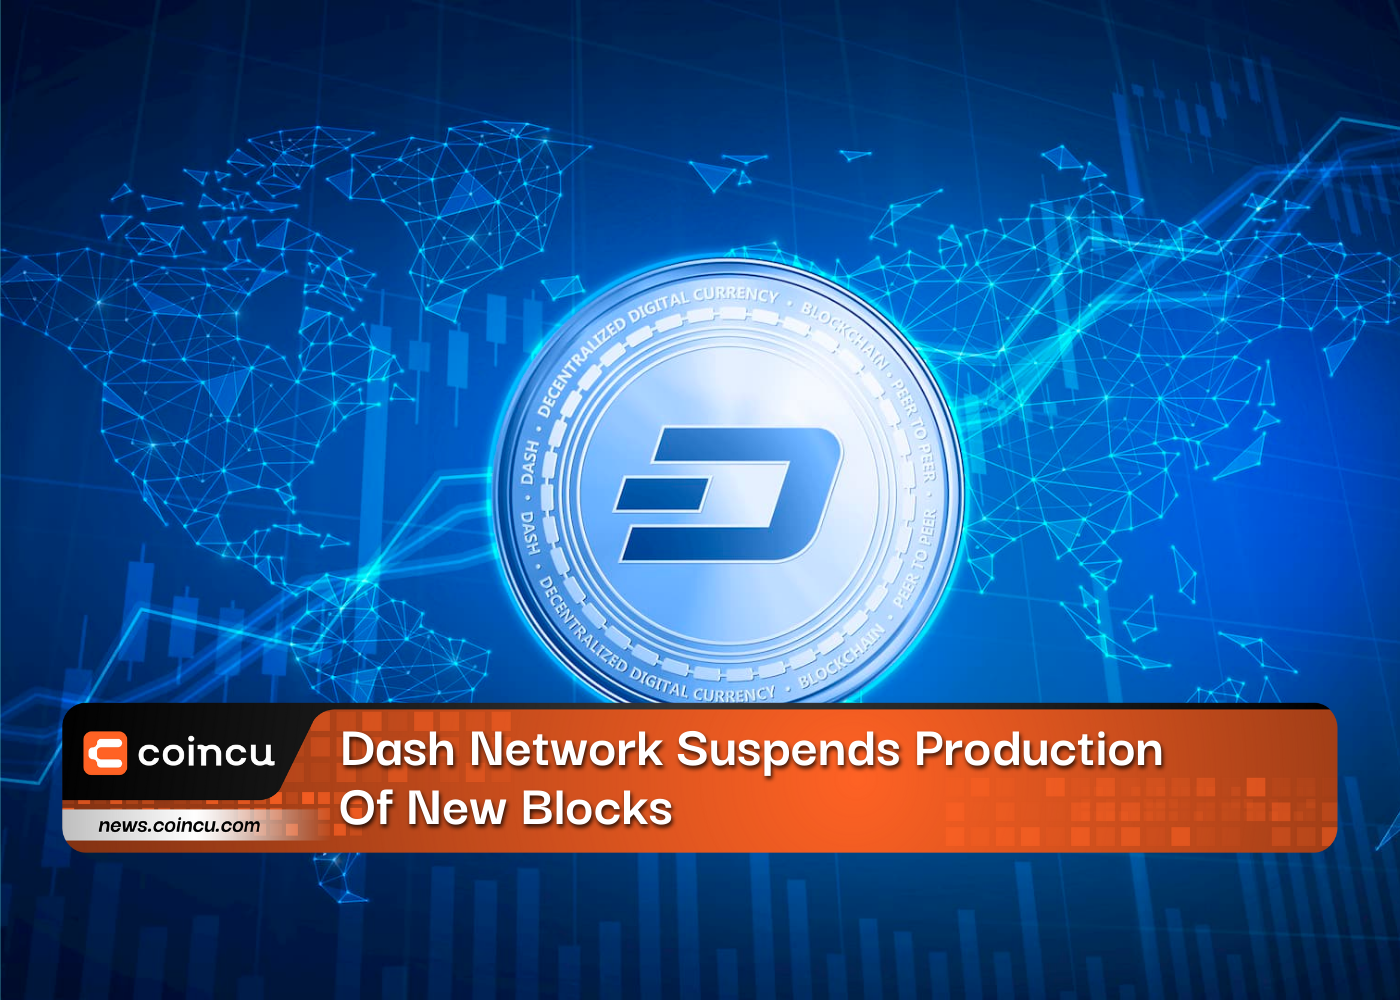 Dash Network Suspends Production Of New Blocks